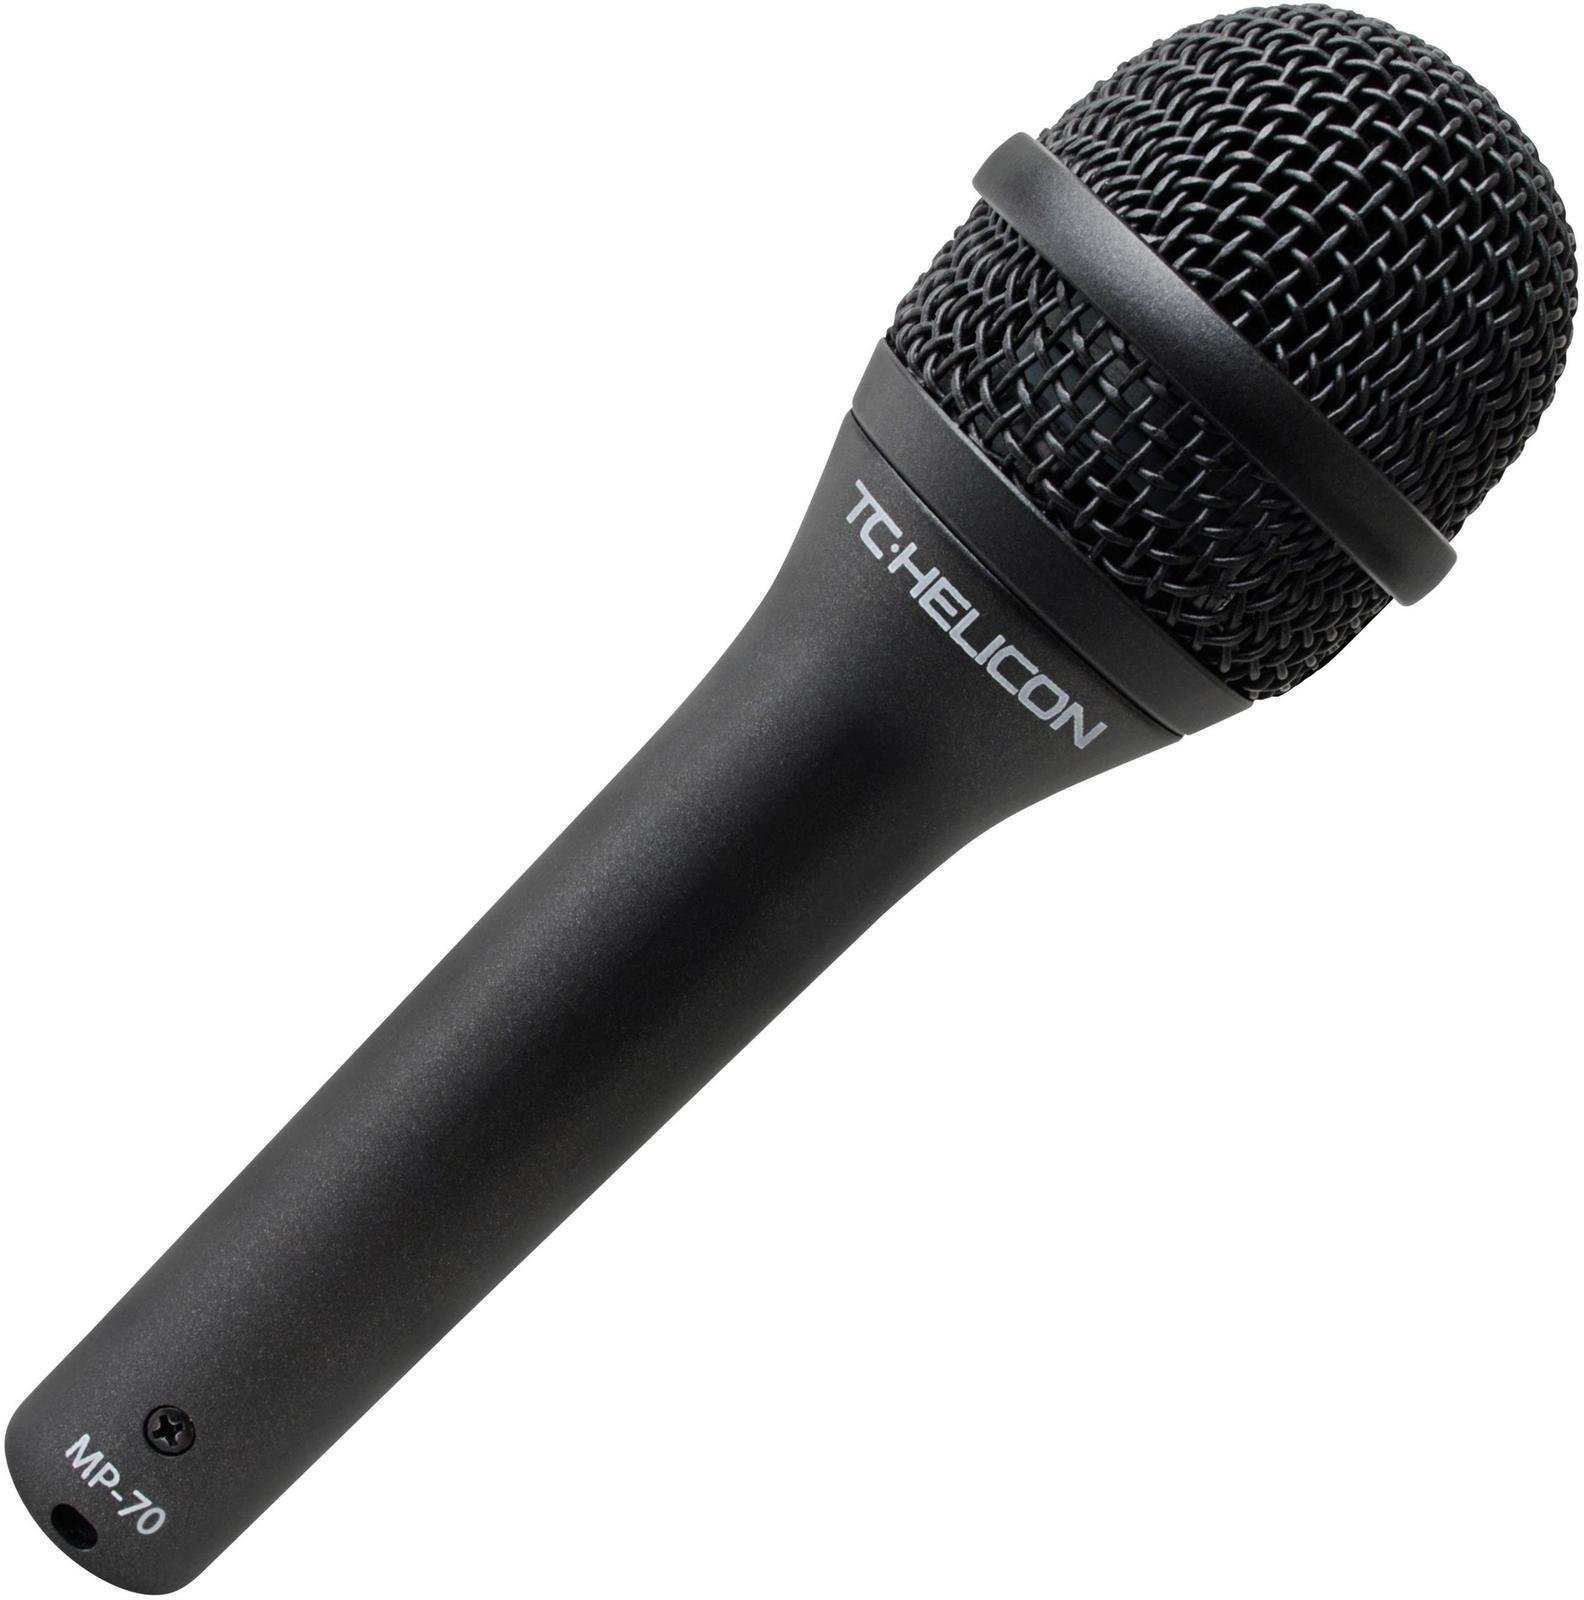 Vocal Dynamic Microphone TC Helicon MP-70 Modern Performance Vocal Microphone